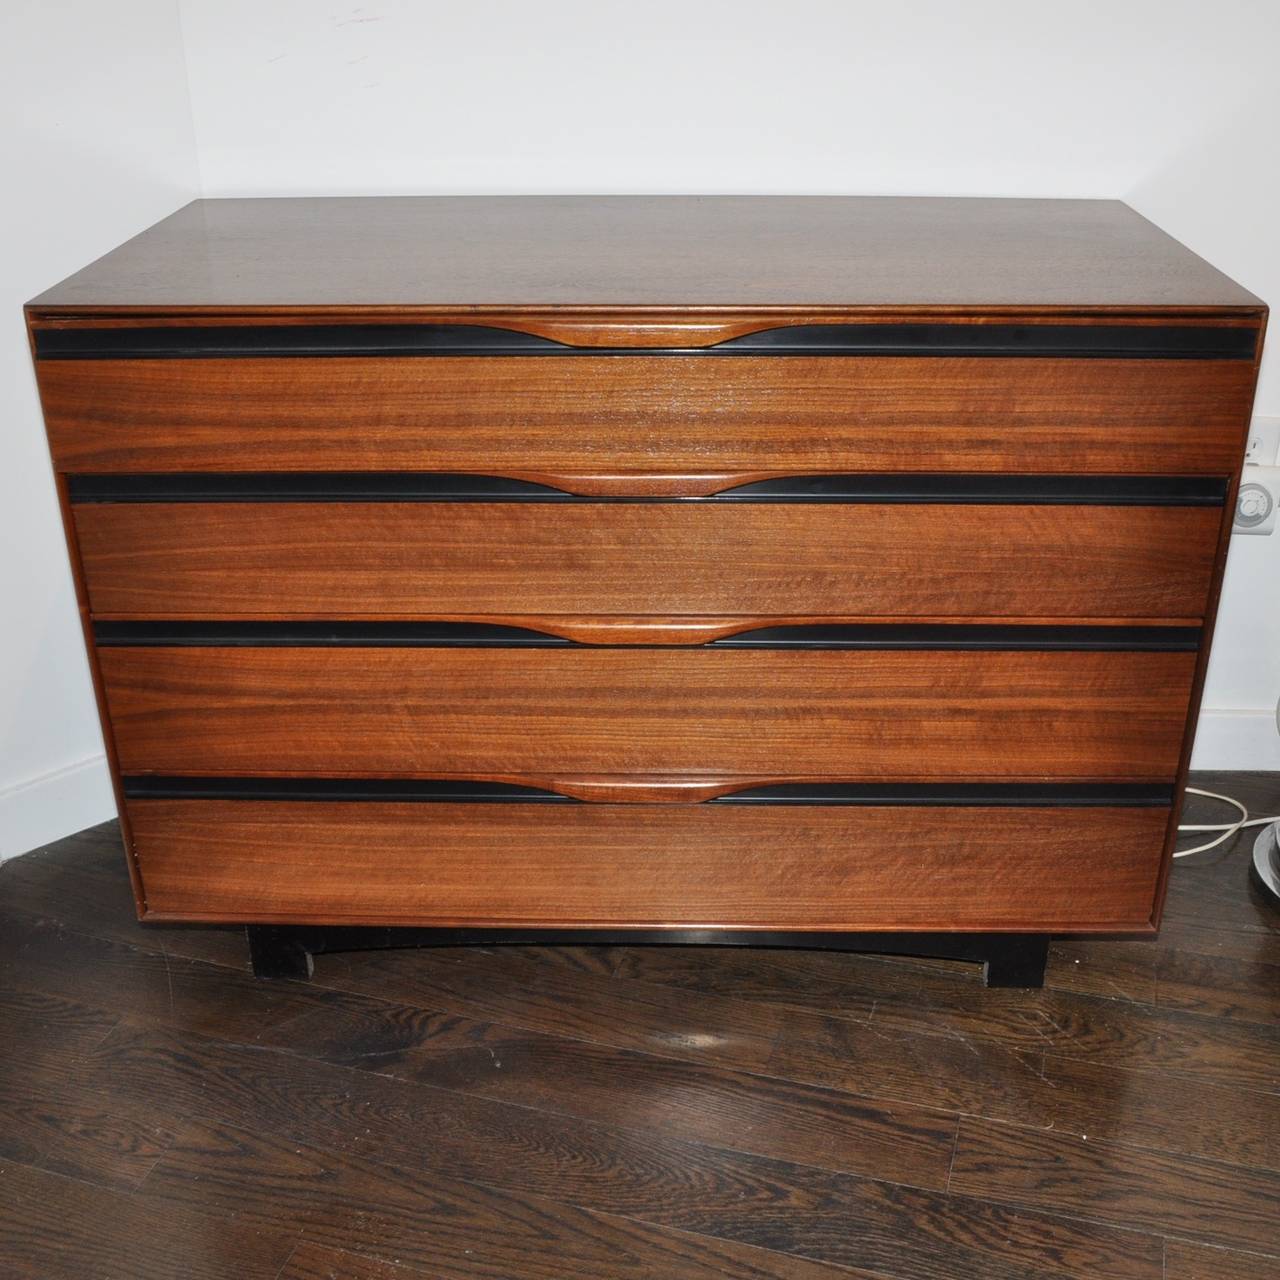 This dresser is manufactured in beautiful walnut with 4 drawers with integrated drawer pull and black edging. Each drawer interior comes with dividers which can be rearranged to suit your needs.